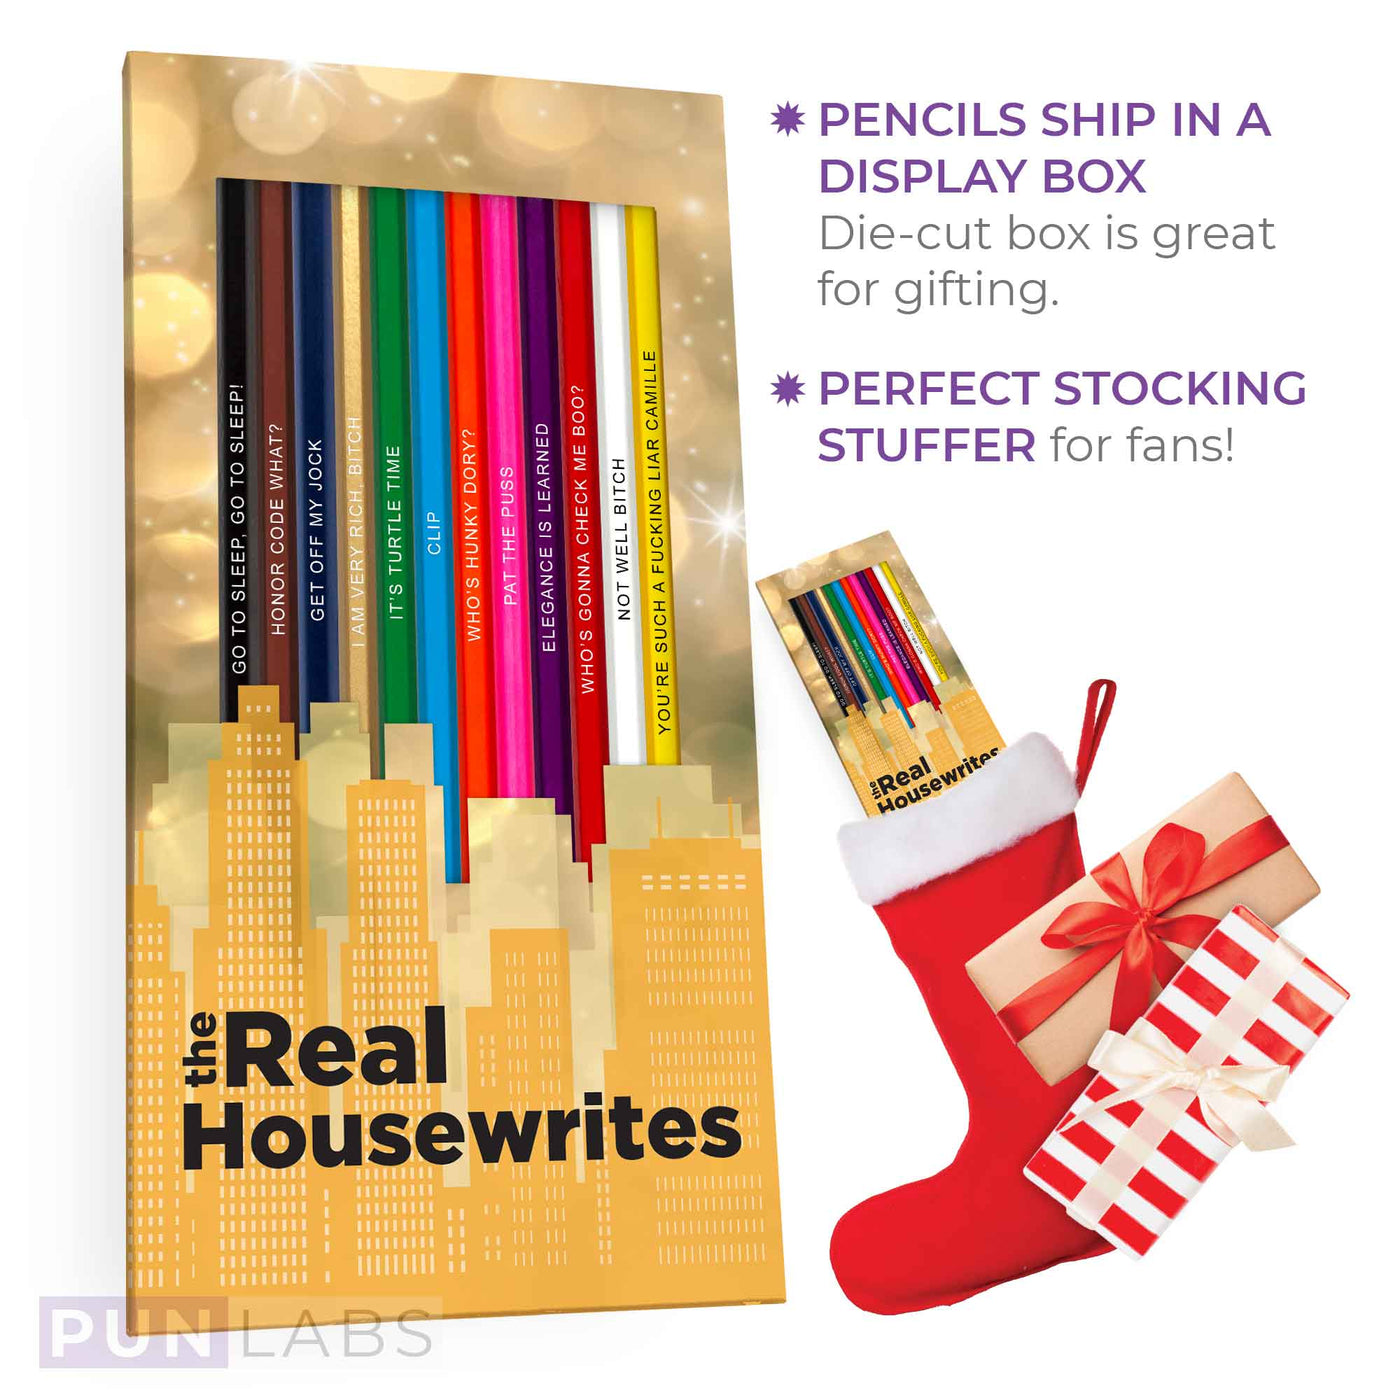 The Real Housewrites Colored Pencils Display. Great Stocking Stuffer for Fans of The Real Housewives